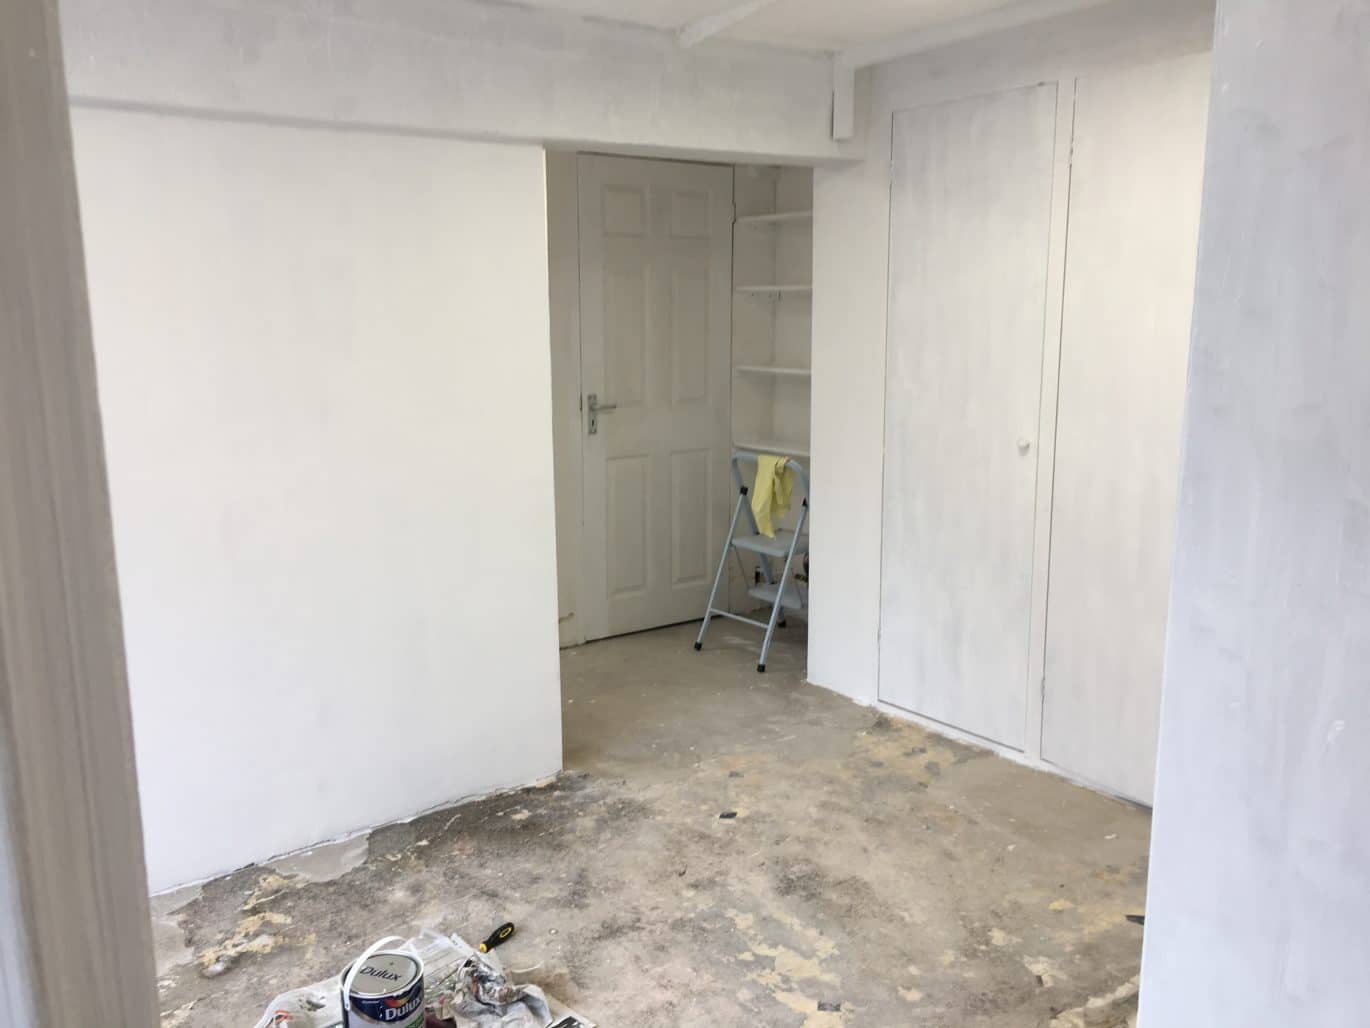 Internal of Clear Interiors of Norwich Premises being Renovated